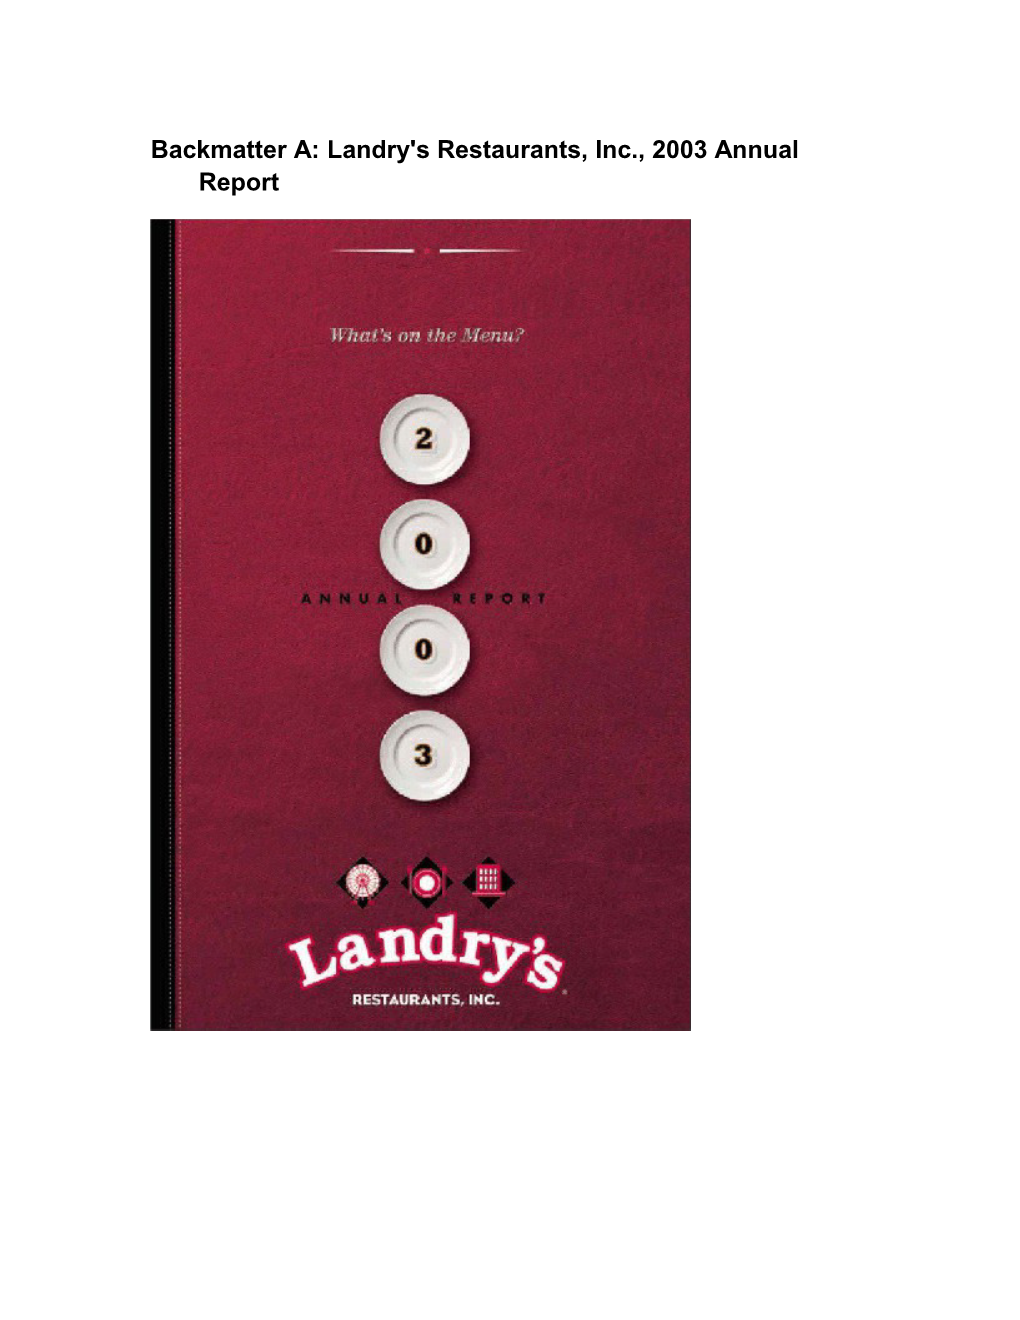 Backmatter A: Landry's Restaurants, Inc., 2003 Annual Report